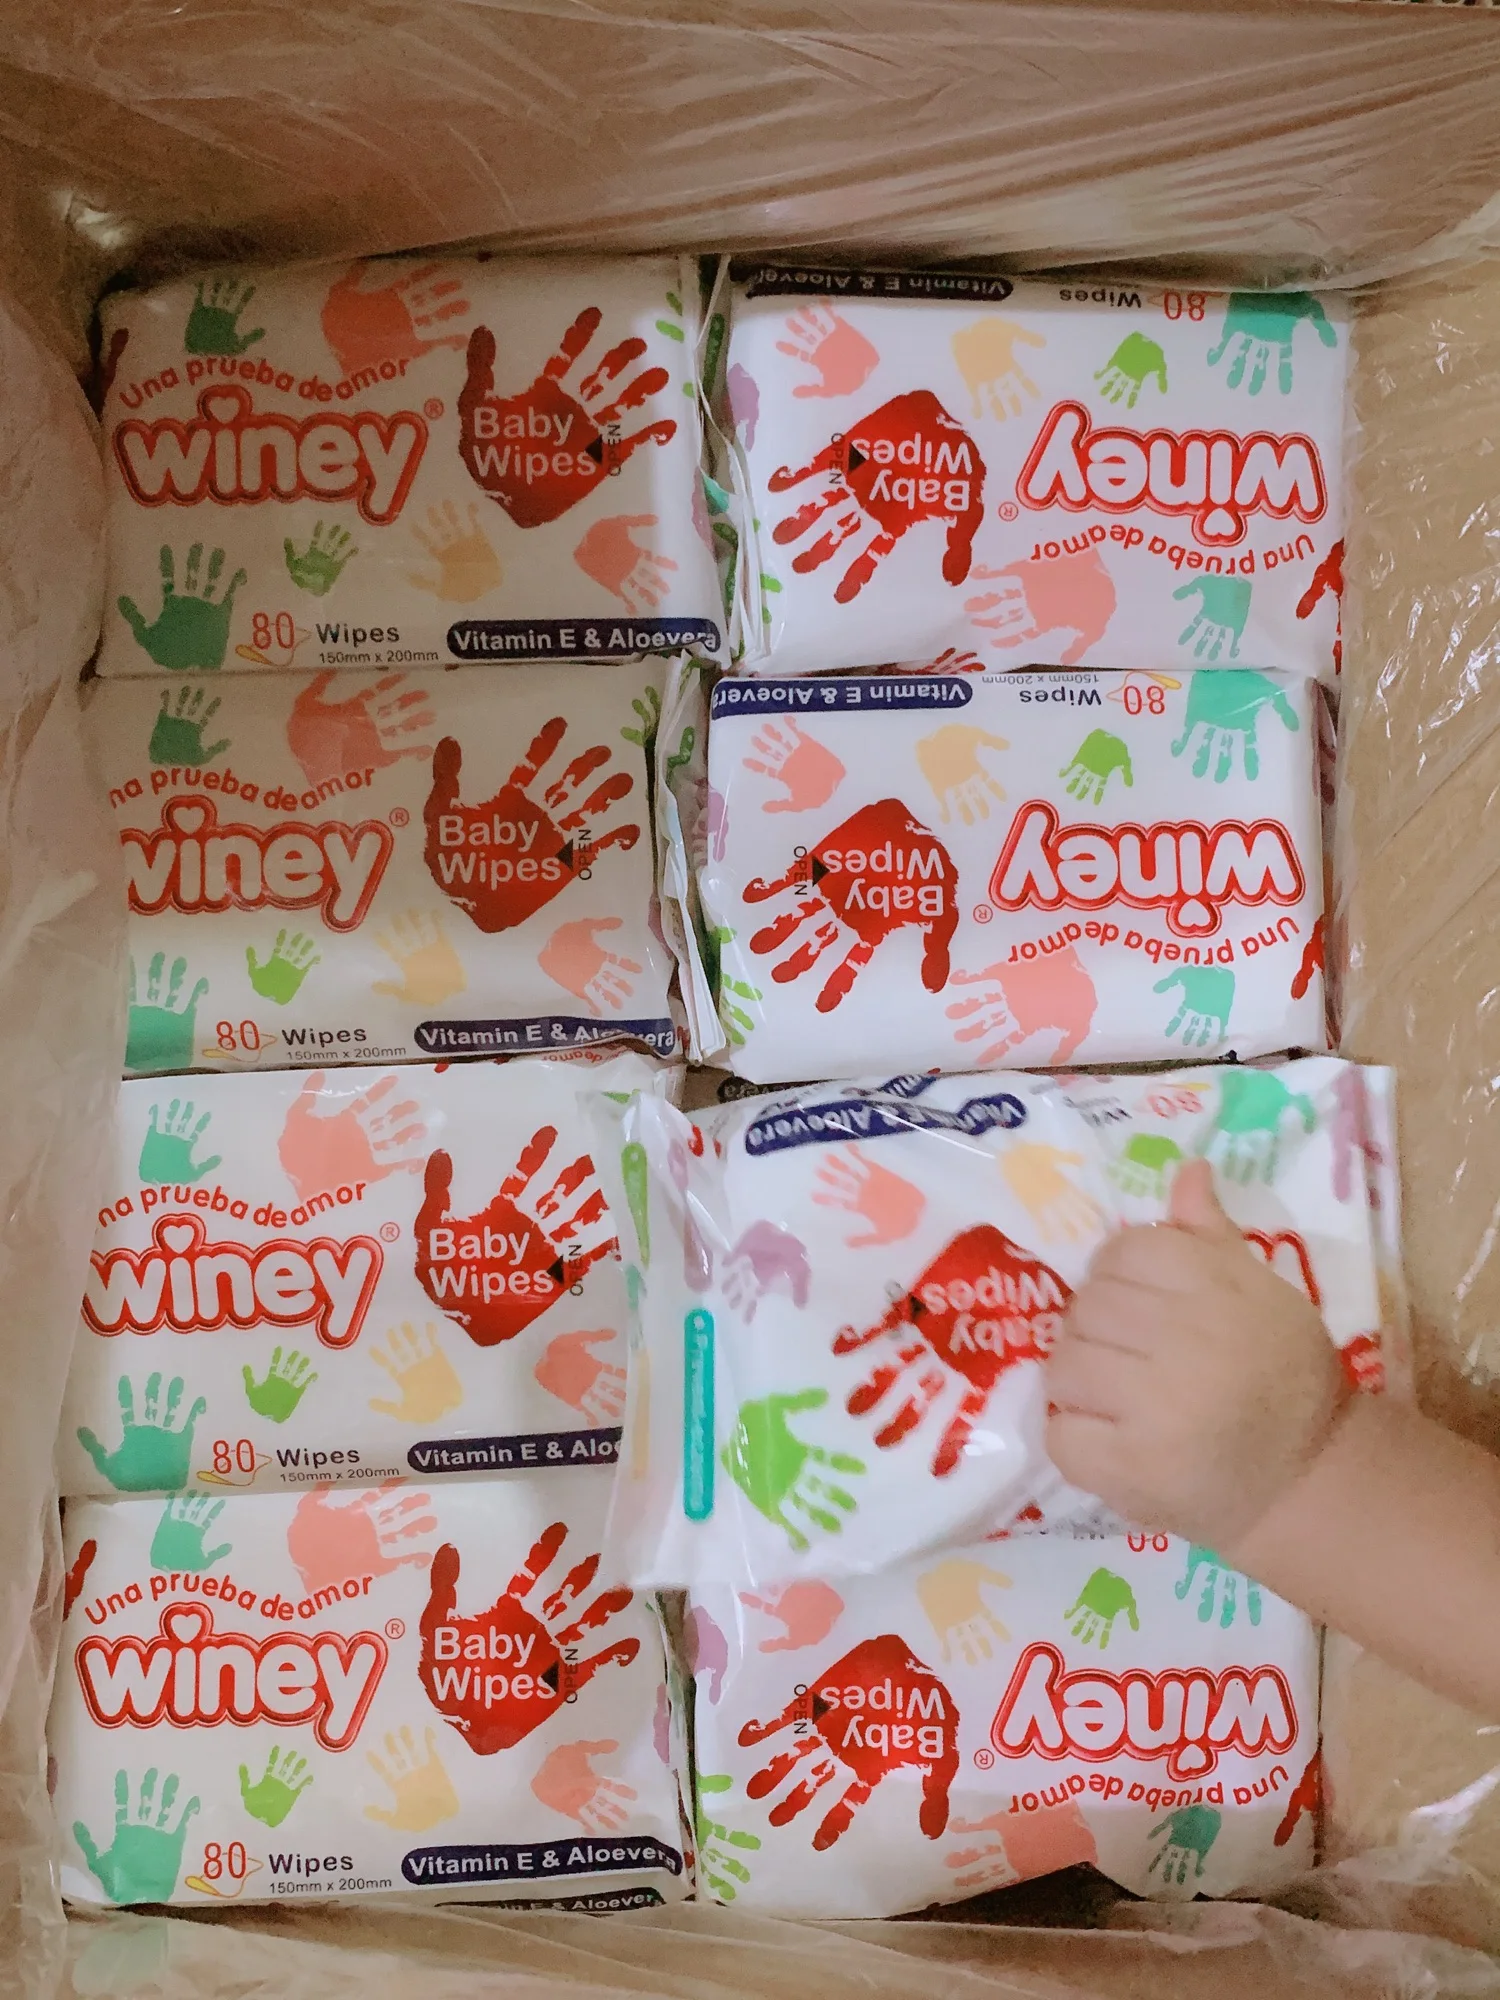 Winey Wipes Baby Wipes 80 Pulls Thick Wide Non Fast Dry With Vit. E and Aloe